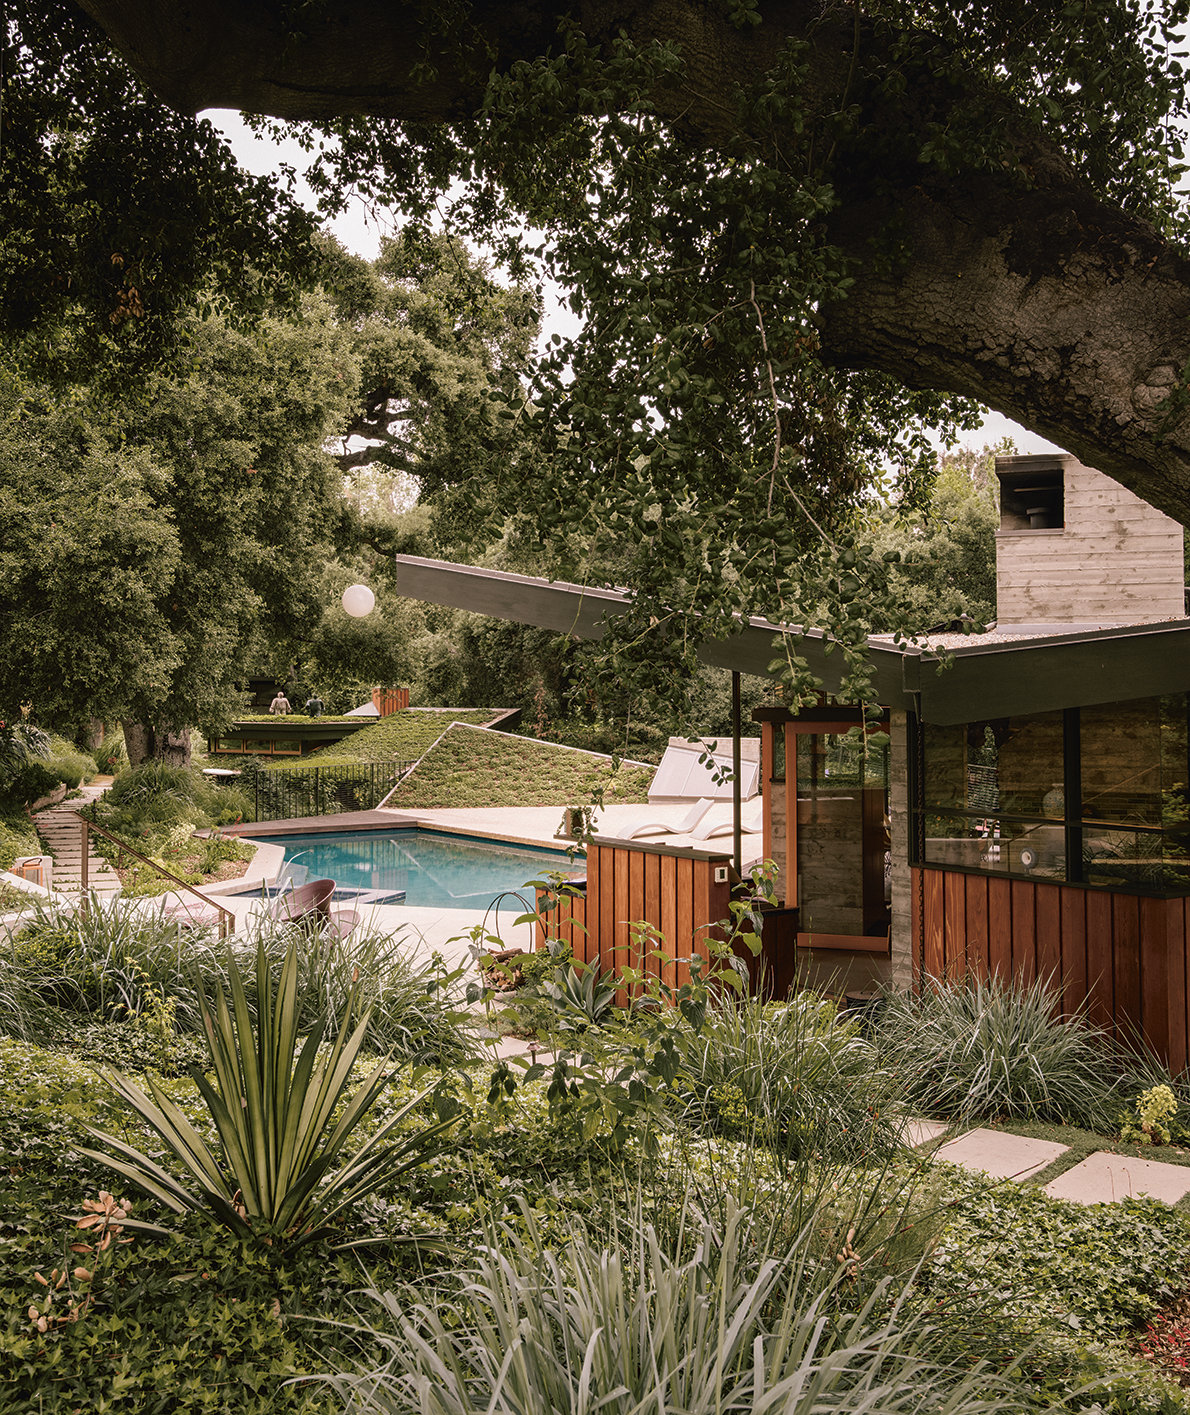 A Mid-Century Home Garden Finds Its Wild Roots